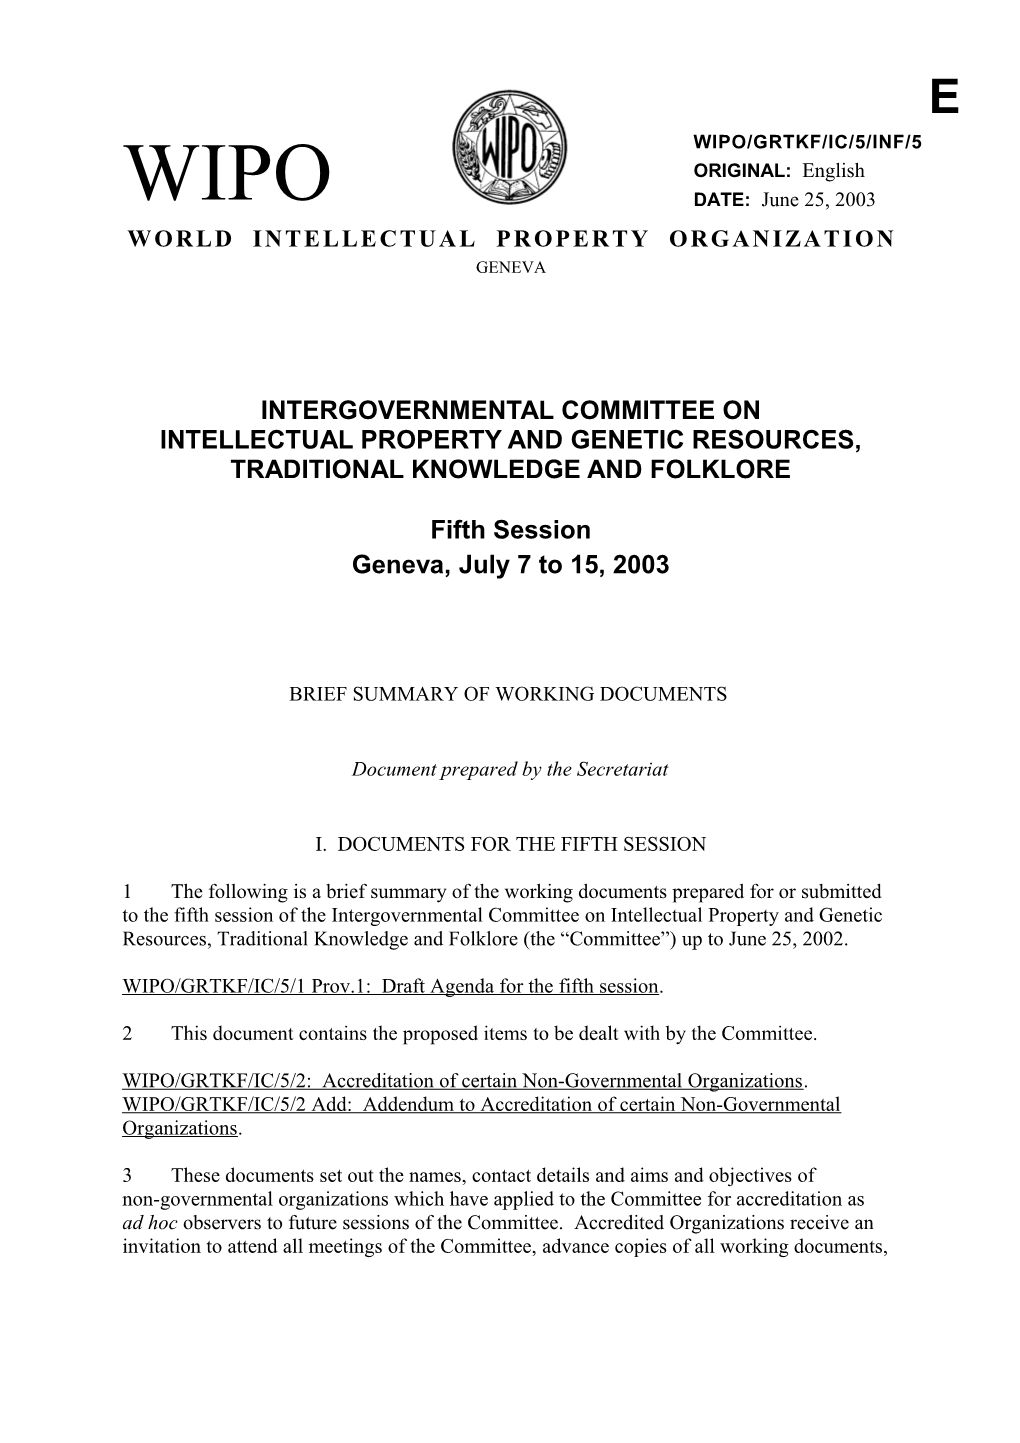 WIPO/GRTKF/IC/5/INF/5: Brief Summary of Working Documents